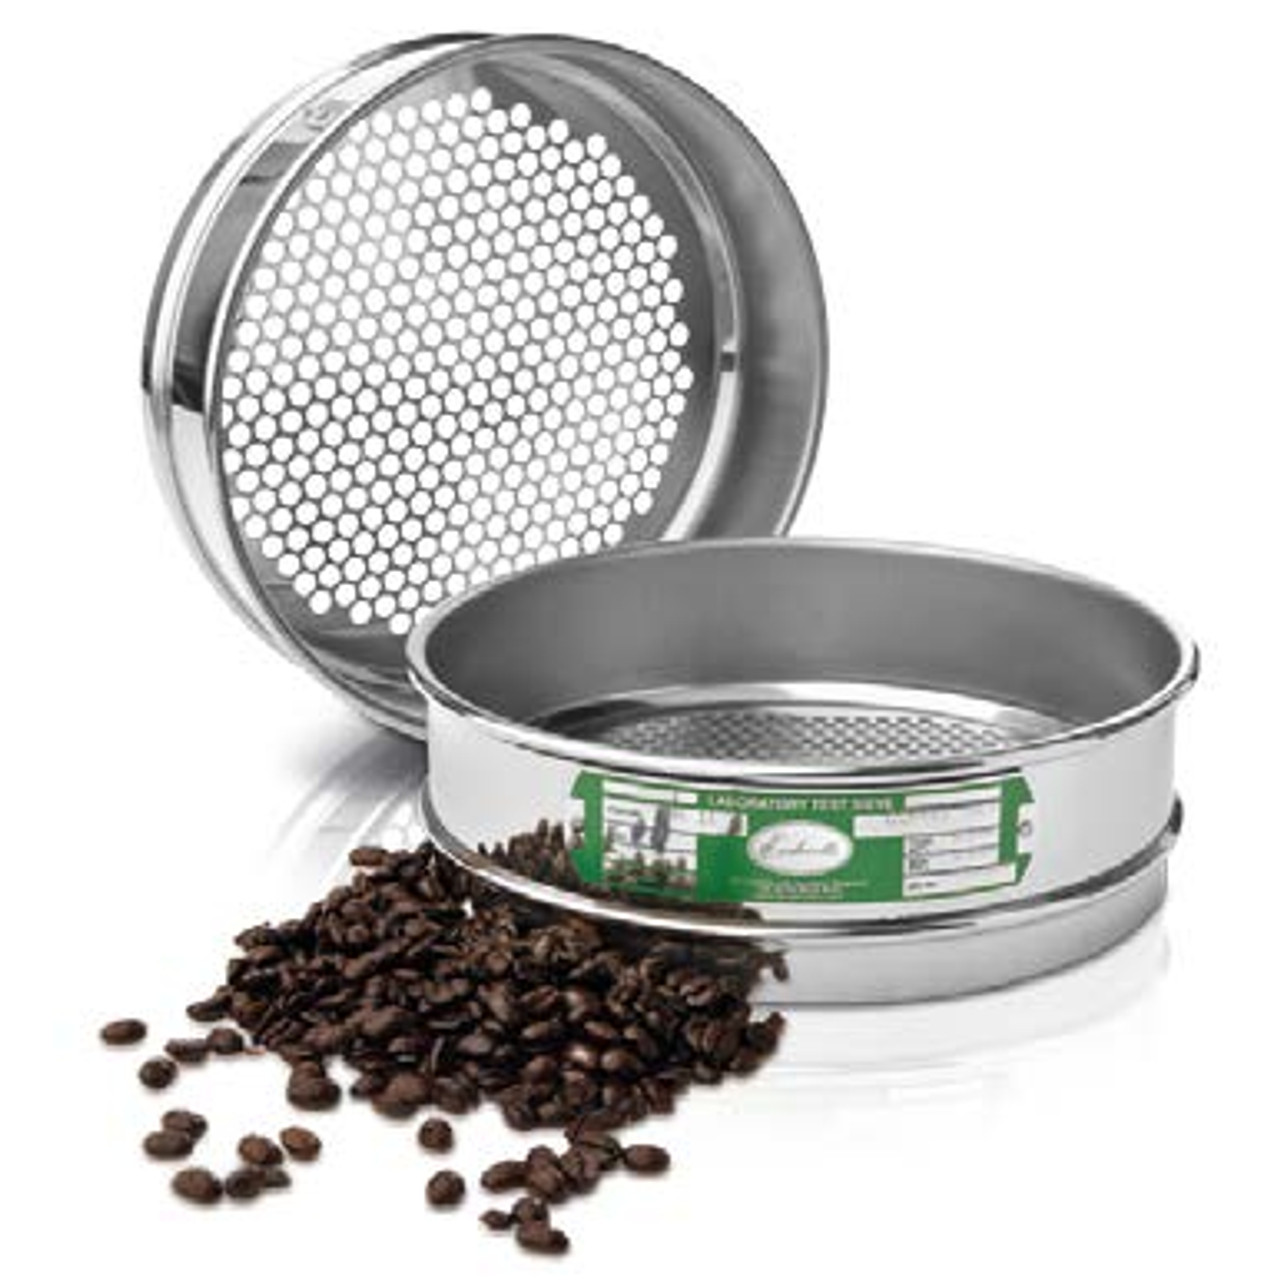 ISO 4150 SIEVE SET
Green coffee or raw coffee — Size
analysis — Manual and machine sieving
Includes 11 round hole grading sieves, and 7 peaberry grading sieves.
ISO 4150 Compliant